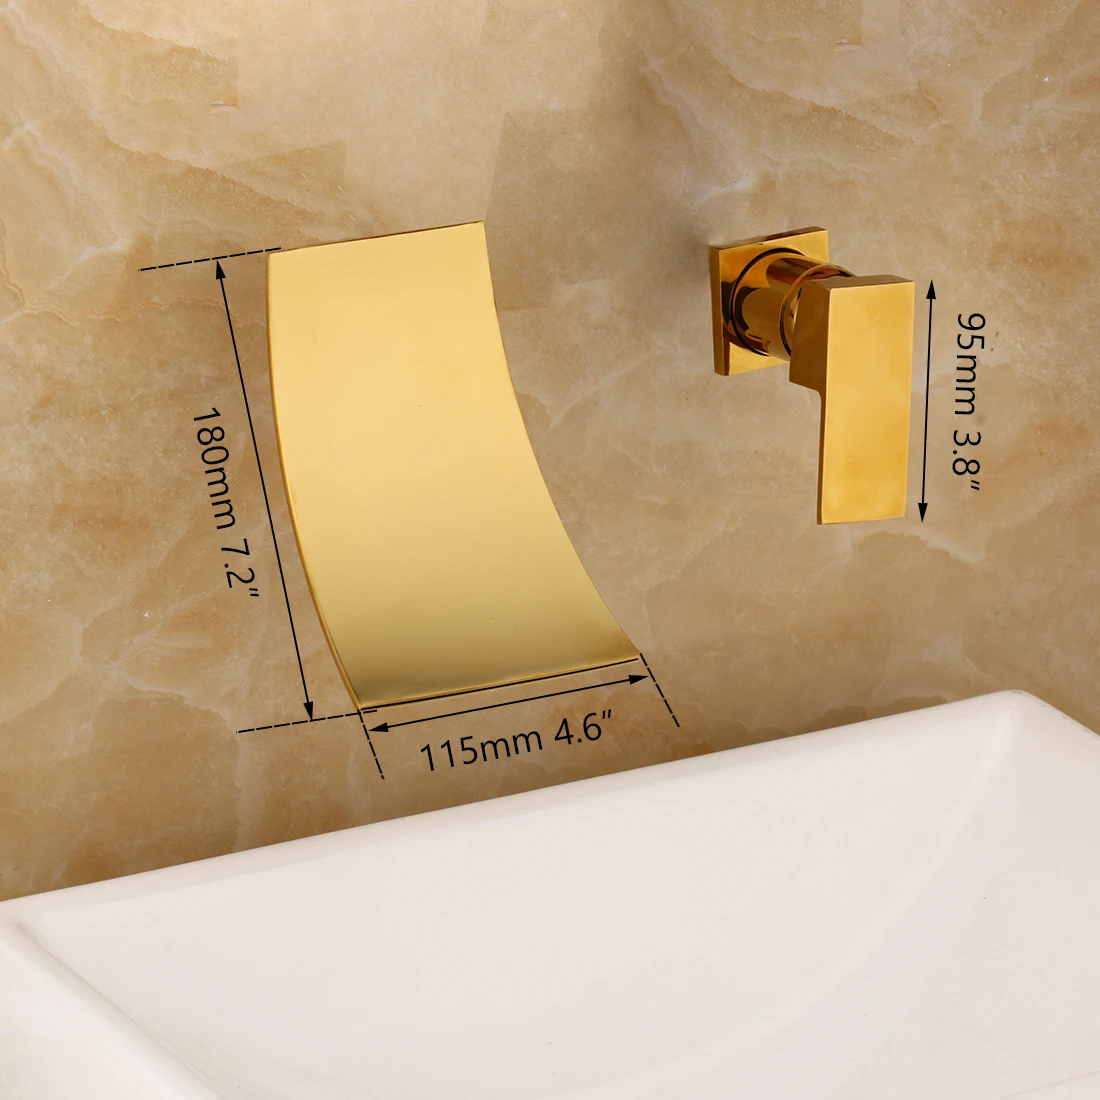 KEMAIDI Brushed Gold Waterfall Bathroom Sink Faucet Single Lever Bathroom Washing Basin Mixer Tap Widespread Lavatory Crane images - 6